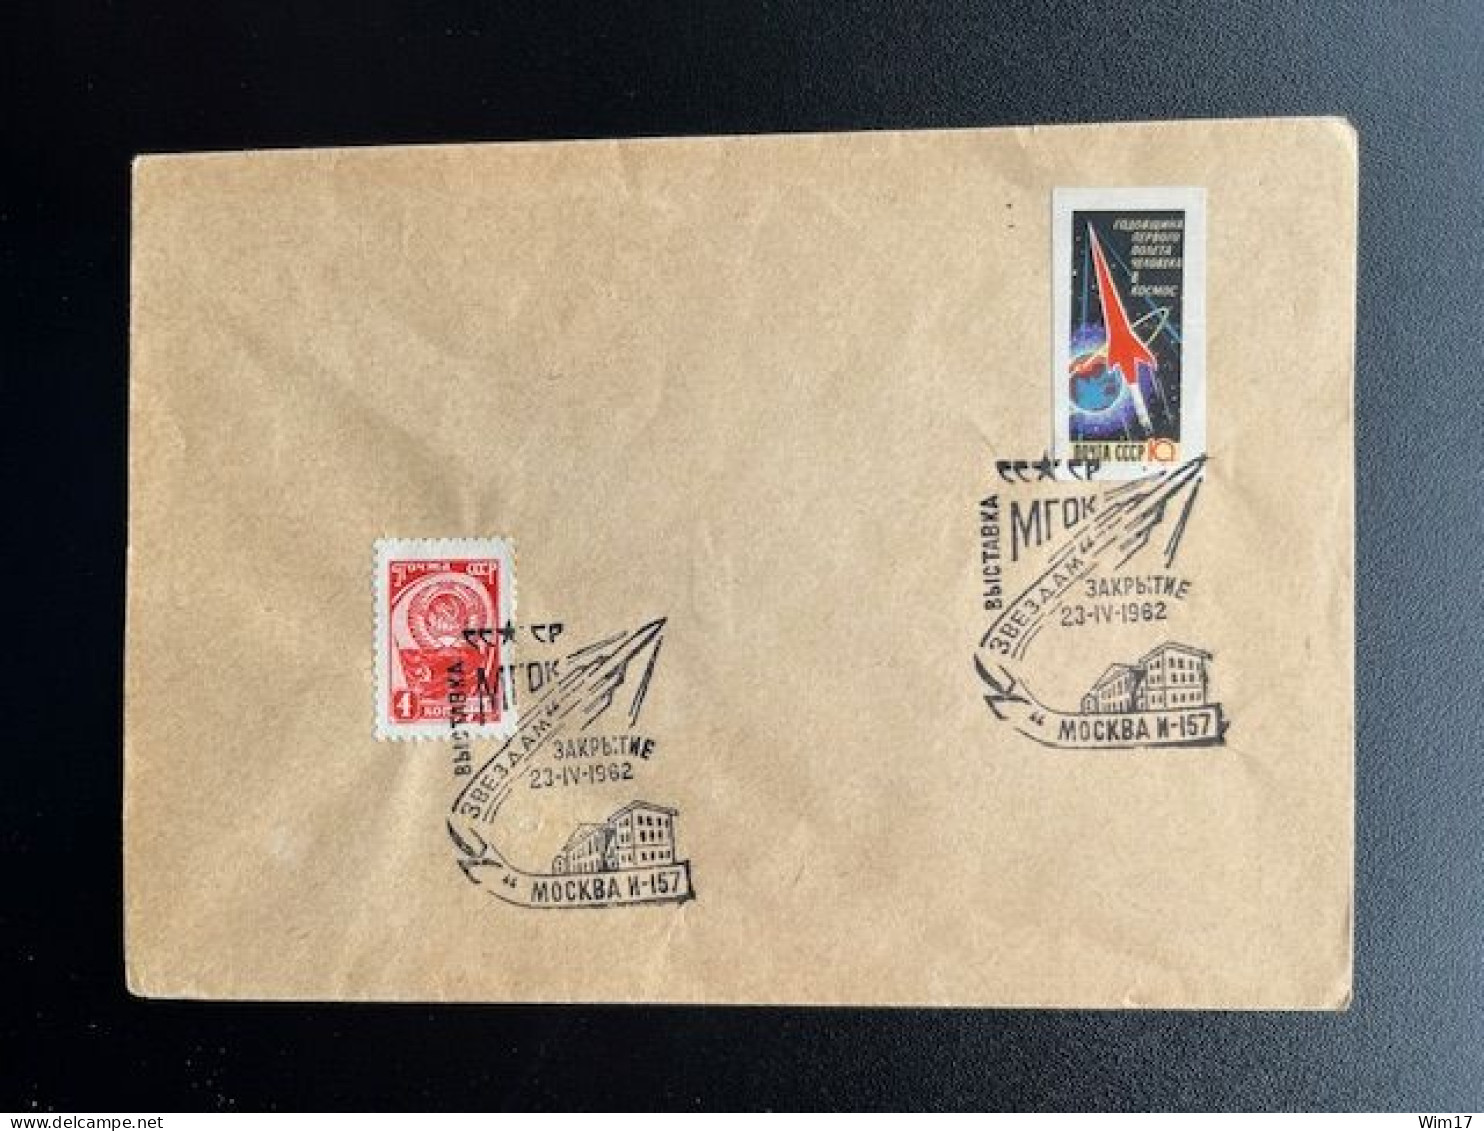 RUSSIA USSR 1962 SPECIAL COVER SPACE 23-04-1962 SOVJET UNIE CCCP SOVIET UNION - Lettres & Documents